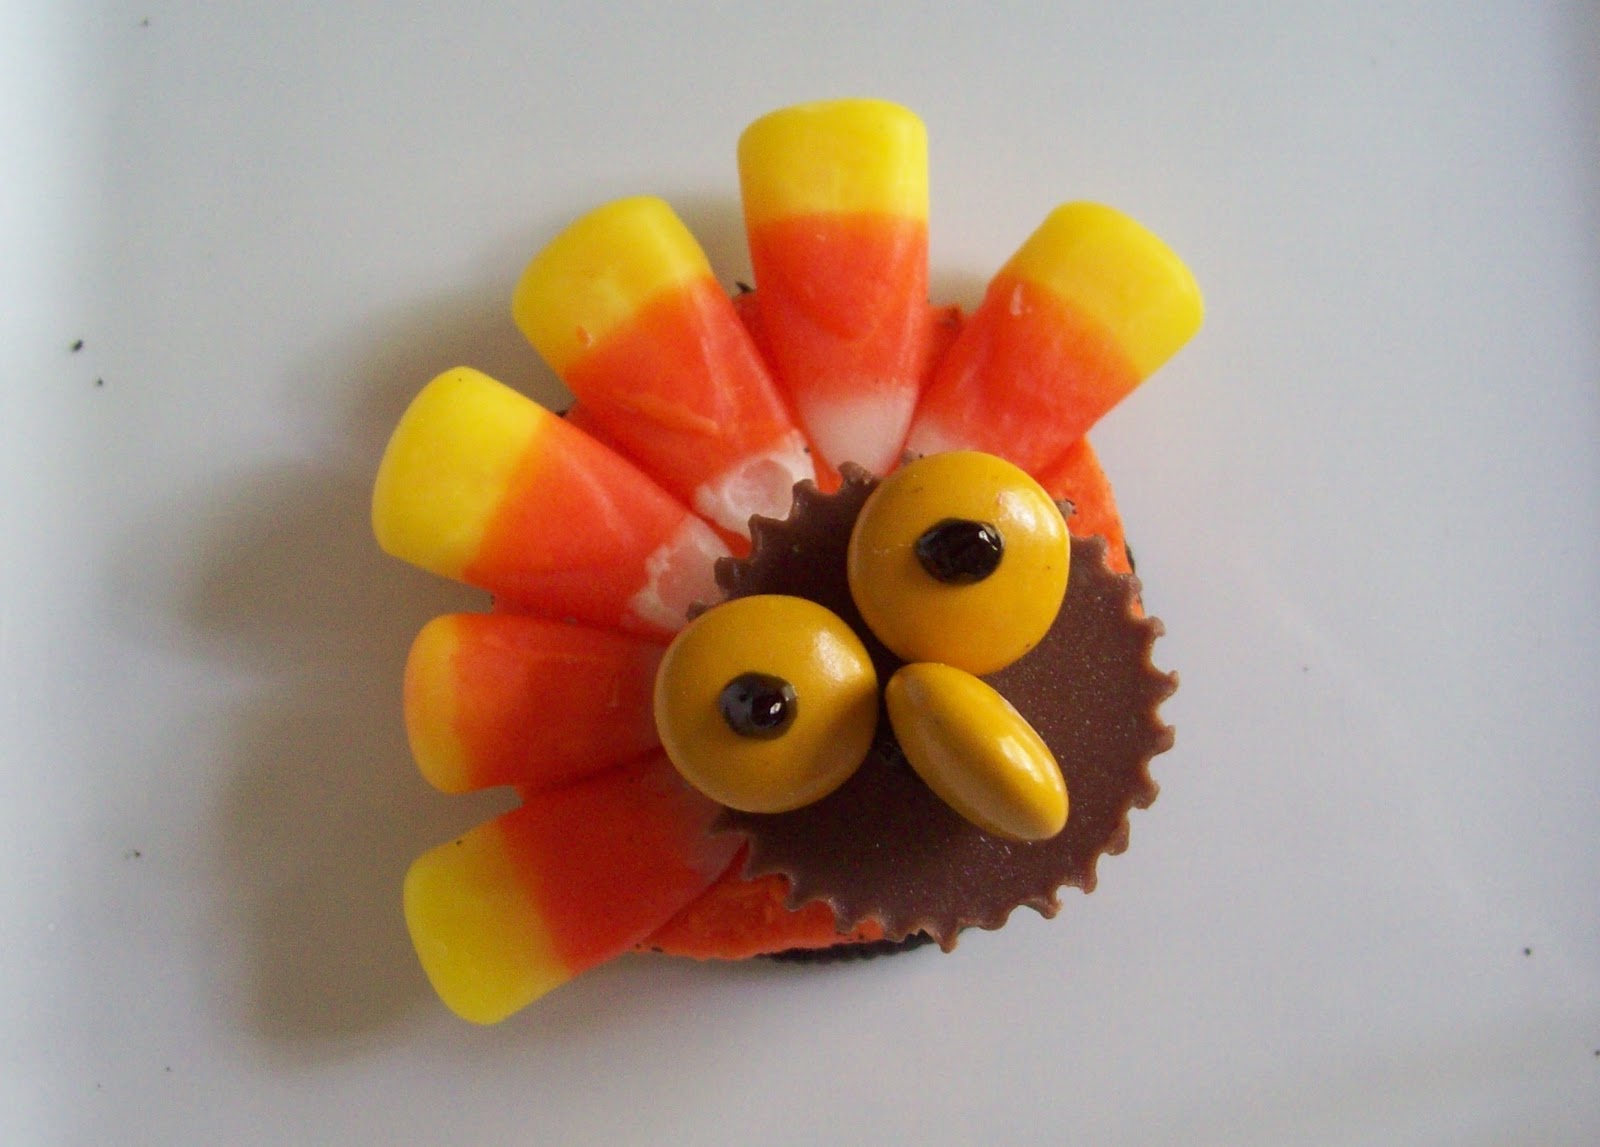 Wife, Mom, Blogger: Solo Ops, Life After The Marine Corps: Candy Turkeys